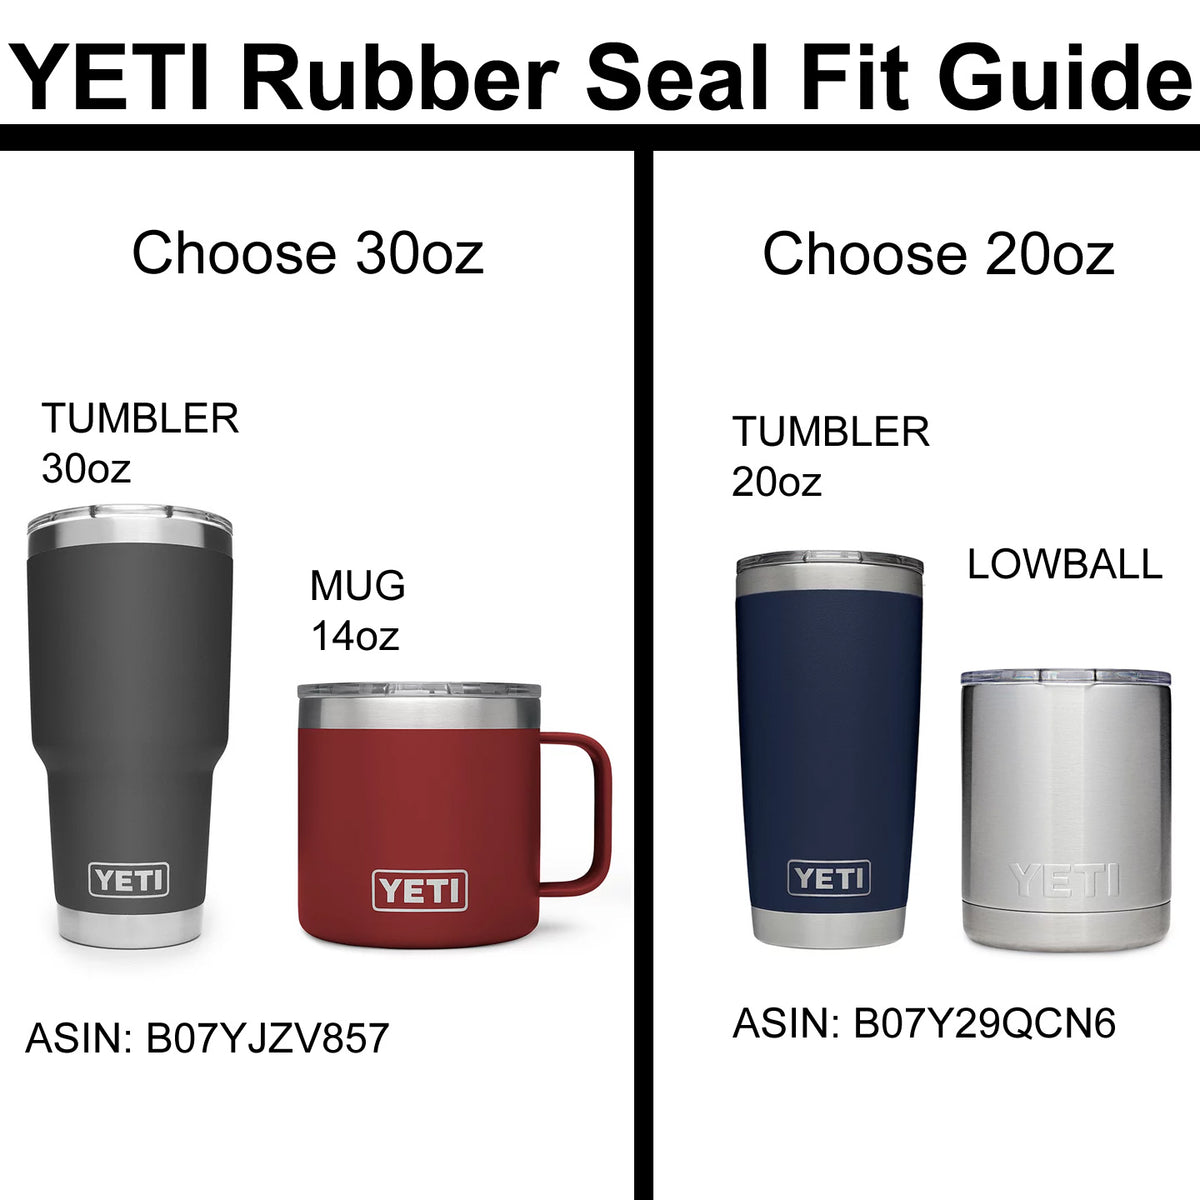 Yeti 20 oz Cup - I normally run my pods twice to get more coffee (yet not  as strong). This yeti 20 oz cup doesn't overfill and fits the height  requirement (although